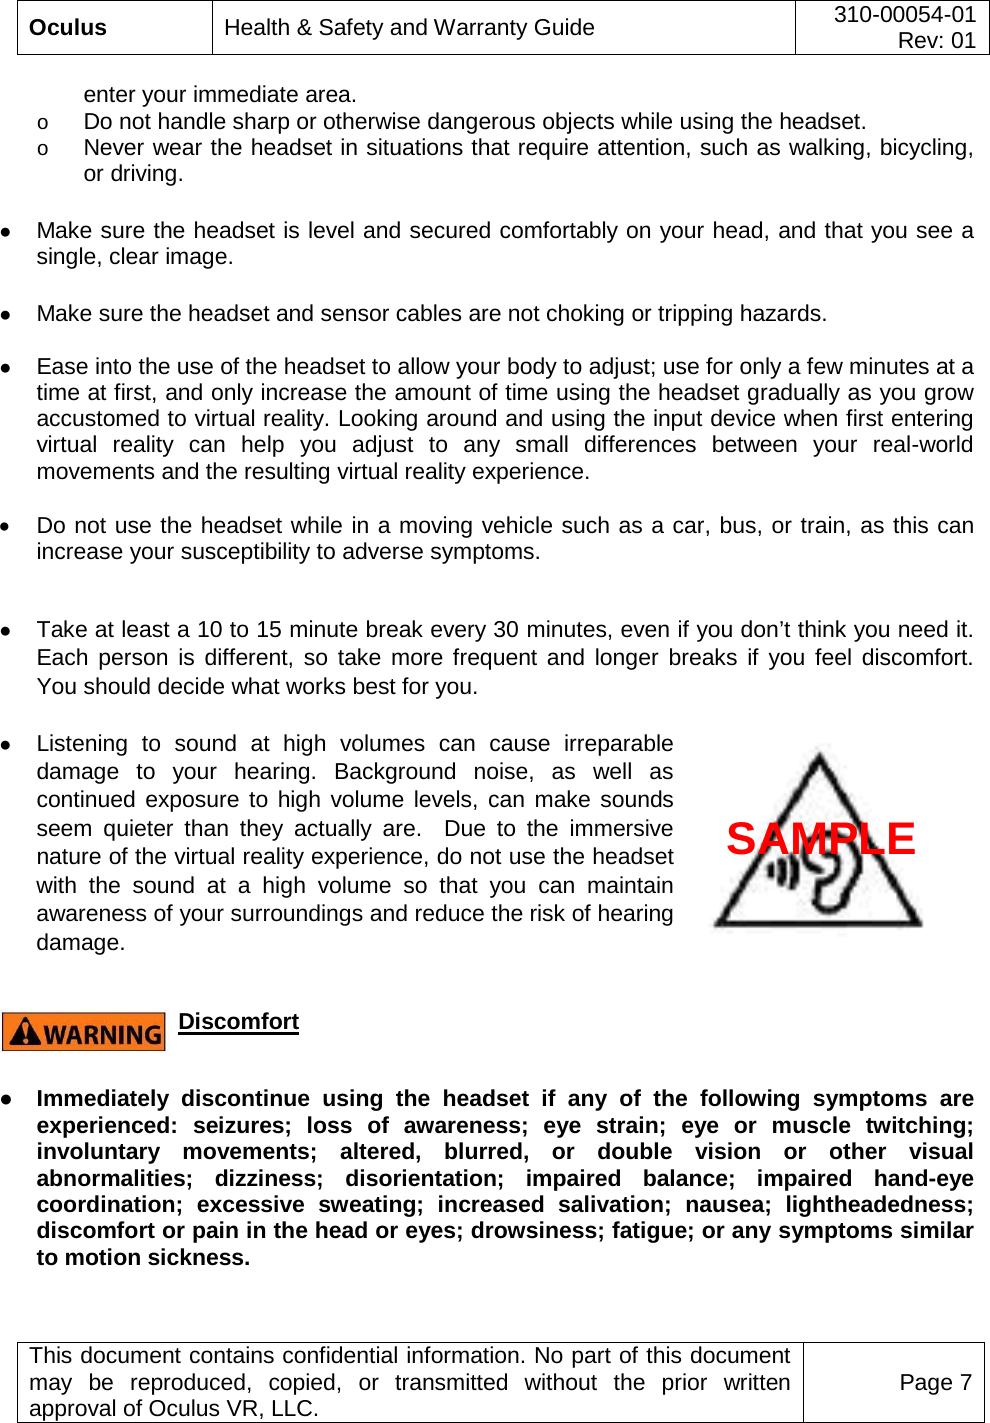  Oculus Health &amp; Safety and Warranty Guide 310-00054-01  Rev: 01   This document contains confidential information. No part of this document may be reproduced, copied, or transmitted without the prior written approval of Oculus VR, LLC. Page 7  enter your immediate area.  o Do not handle sharp or otherwise dangerous objects while using the headset.   o Never wear the headset in situations that require attention, such as walking, bicycling, or driving.  ● Make sure the headset is level and secured comfortably on your head, and that you see a single, clear image.    ● Make sure the headset and sensor cables are not choking or tripping hazards.  ● Ease into the use of the headset to allow your body to adjust; use for only a few minutes at a time at first, and only increase the amount of time using the headset gradually as you grow accustomed to virtual reality. Looking around and using the input device when first entering virtual reality can help you adjust to any small differences between your real-world movements and the resulting virtual reality experience.  • Do not use the headset while in a moving vehicle such as a car, bus, or train, as this can increase your susceptibility to adverse symptoms.  ● Take at least a 10 to 15 minute break every 30 minutes, even if you don’t think you need it. Each person is different, so take more frequent and longer breaks if you feel discomfort.  You should decide what works best for you.  ● Listening to sound at high volumes can cause irreparable damage to your hearing. Background noise, as well as continued exposure to high volume levels, can make sounds seem quieter than they actually are.  Due to the immersive nature of the virtual reality experience, do not use the headset with the sound at a high volume so that you can maintain awareness of your surroundings and reduce the risk of hearing damage.    Discomfort  ● Immediately discontinue using the headset if  any of the following symptoms are experienced:  seizures; loss of awareness; eye strain; eye or muscle twitching; involuntary movements; altered, blurred, or double vision or other visual abnormalities; dizziness; disorientation; impaired balance; impaired hand-eye coordination; excessive sweating; increased salivation; nausea; lightheadedness; discomfort or pain in the head or eyes; drowsiness; fatigue; or any symptoms similar to motion sickness. SAMPLE 